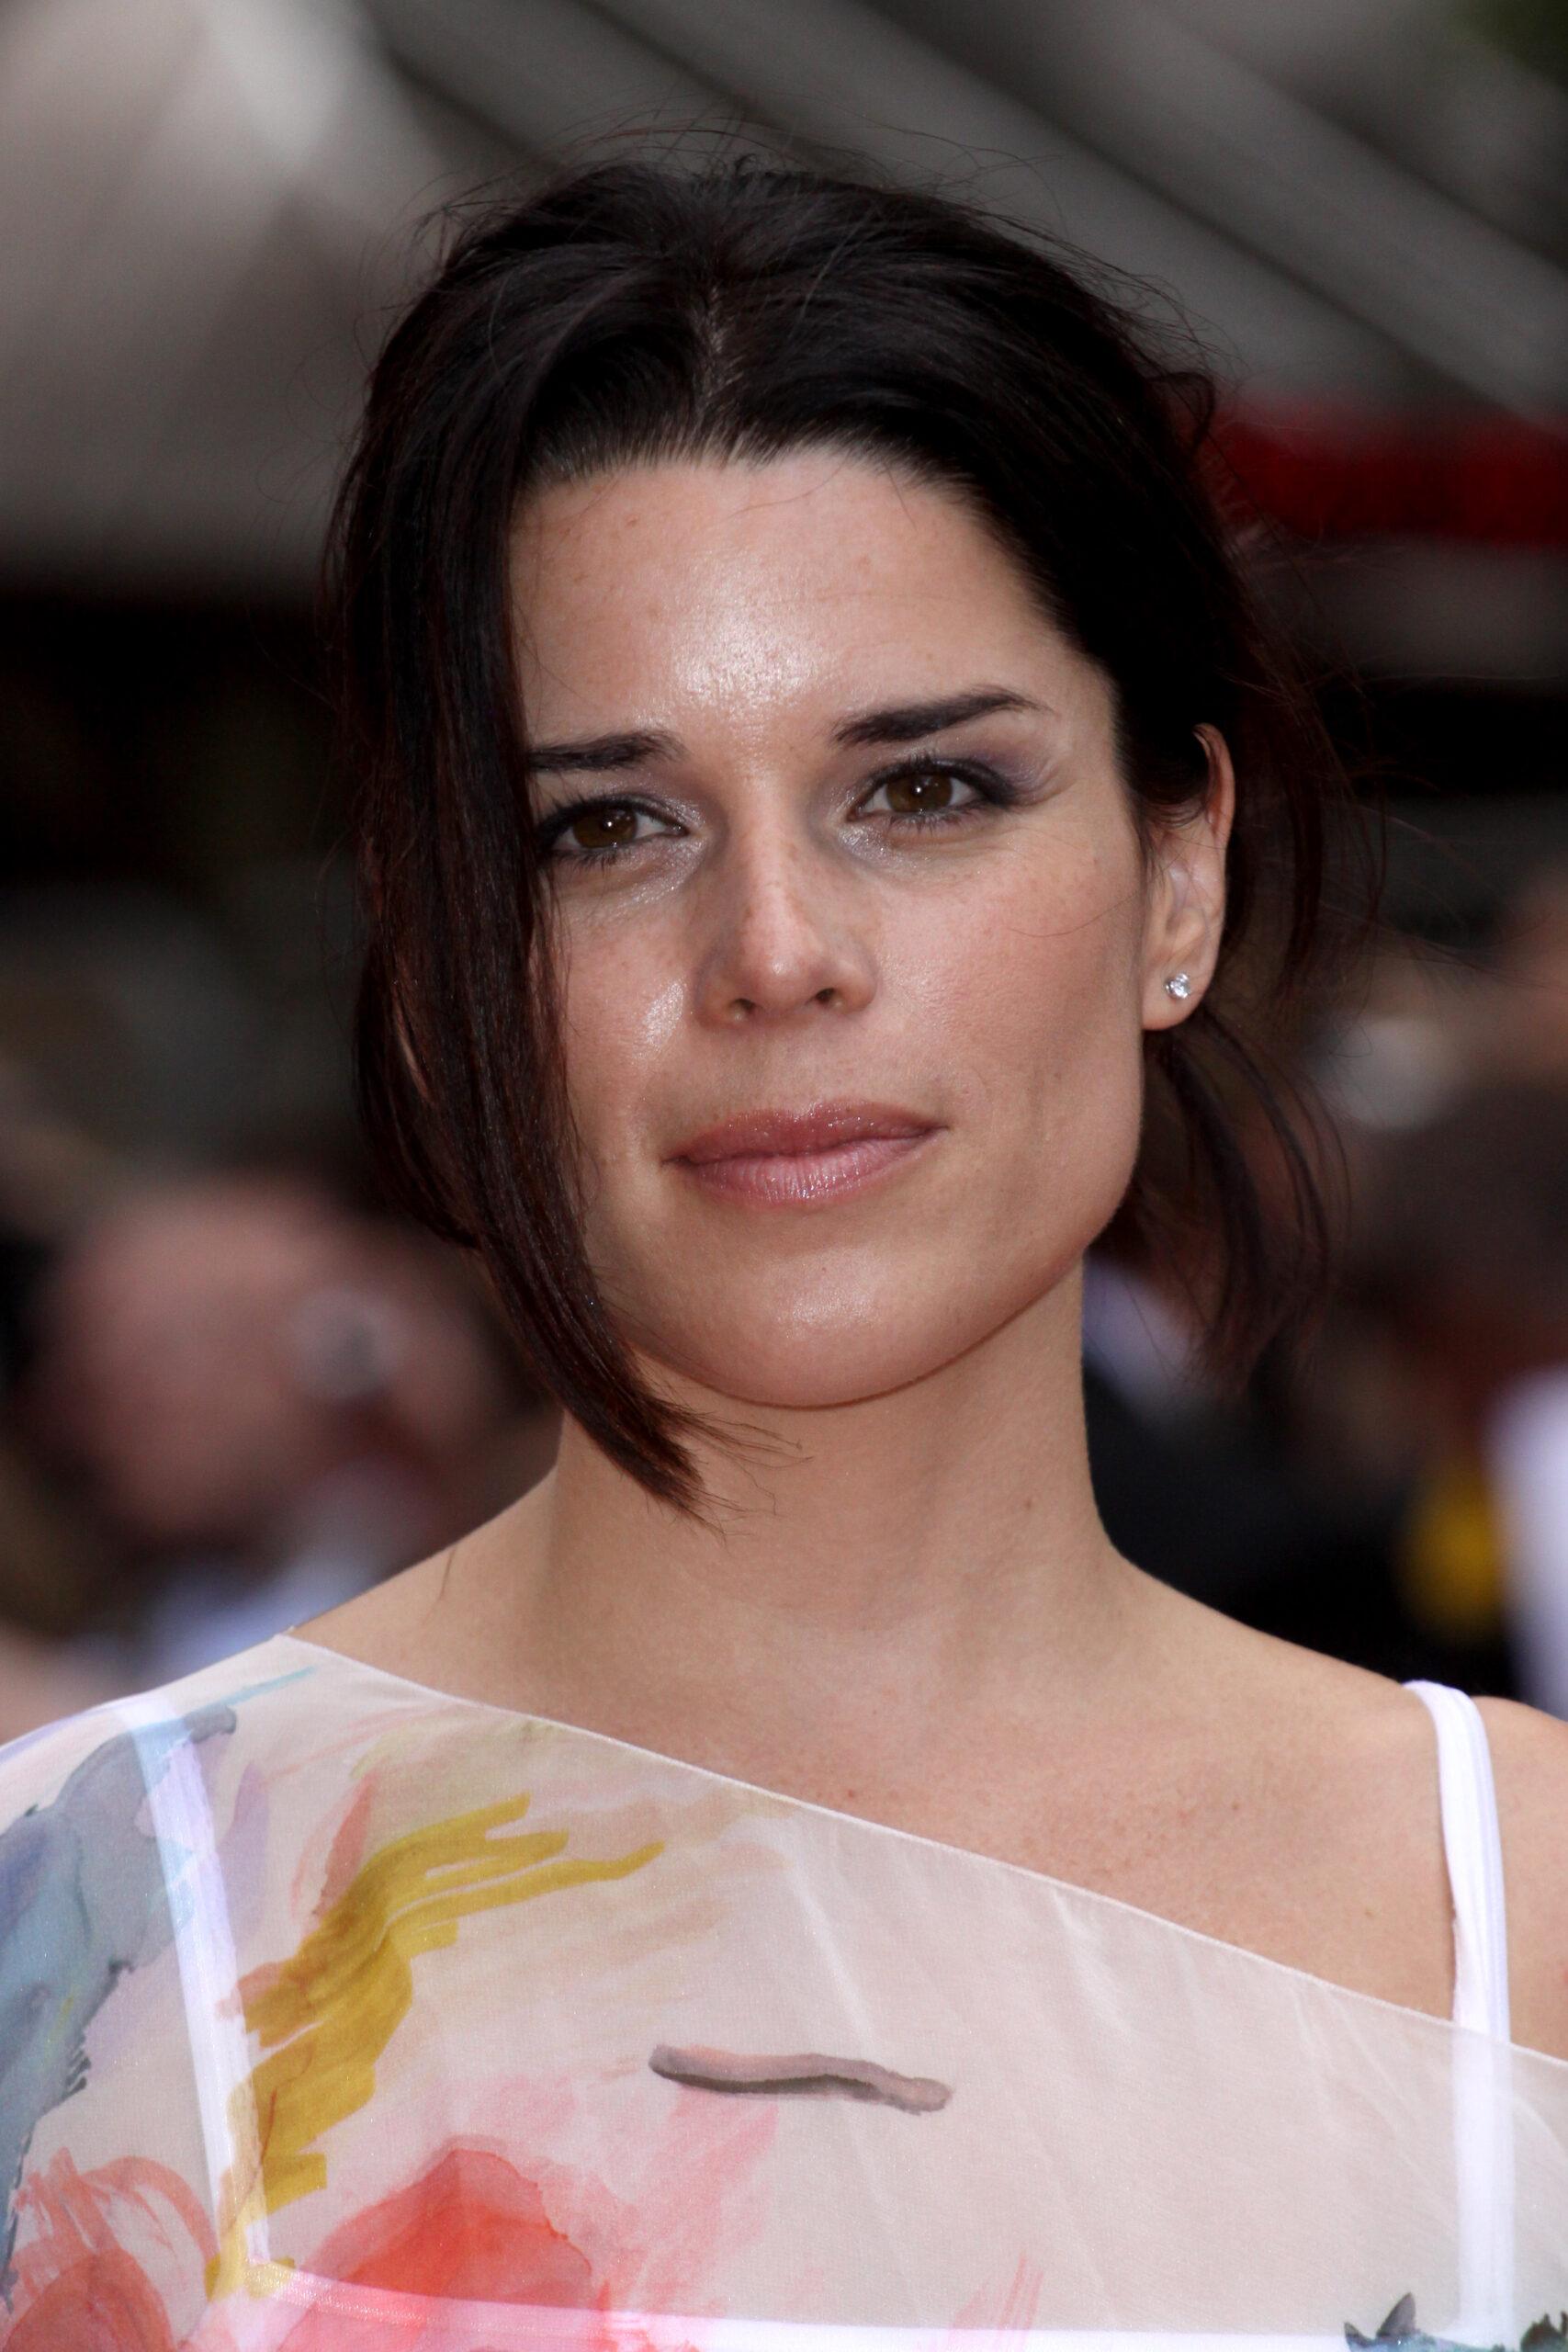 Neve Campbell at "Inglorious Basterds" UK Premiere at the Odeon Leicester Square, London, UK.